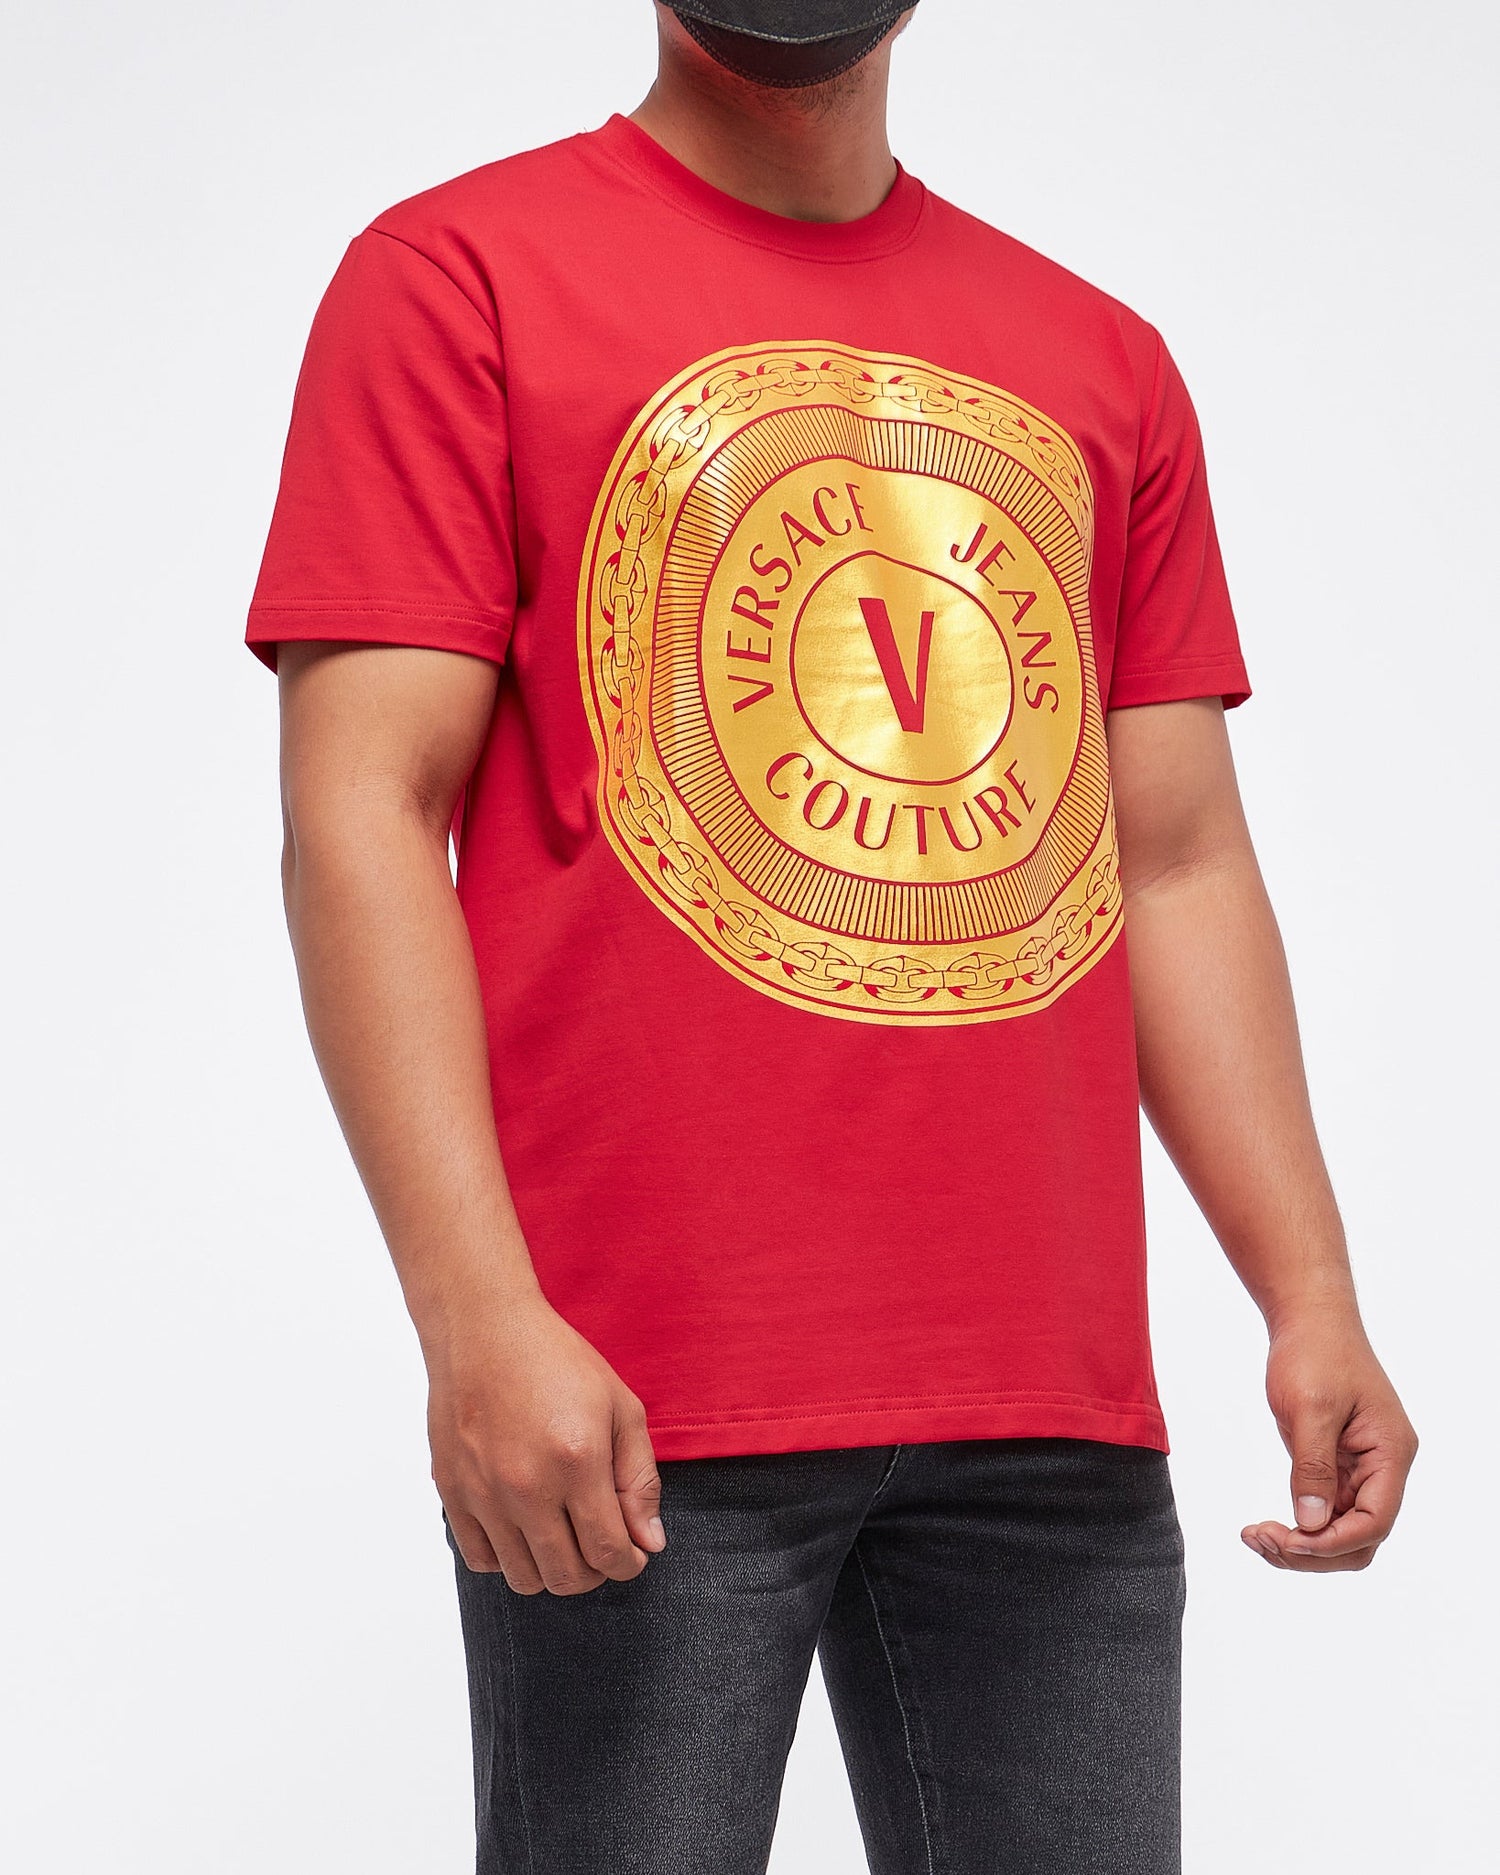 MOI OUTFIT-Round V Couture Gold Men T-Shirt 15.90